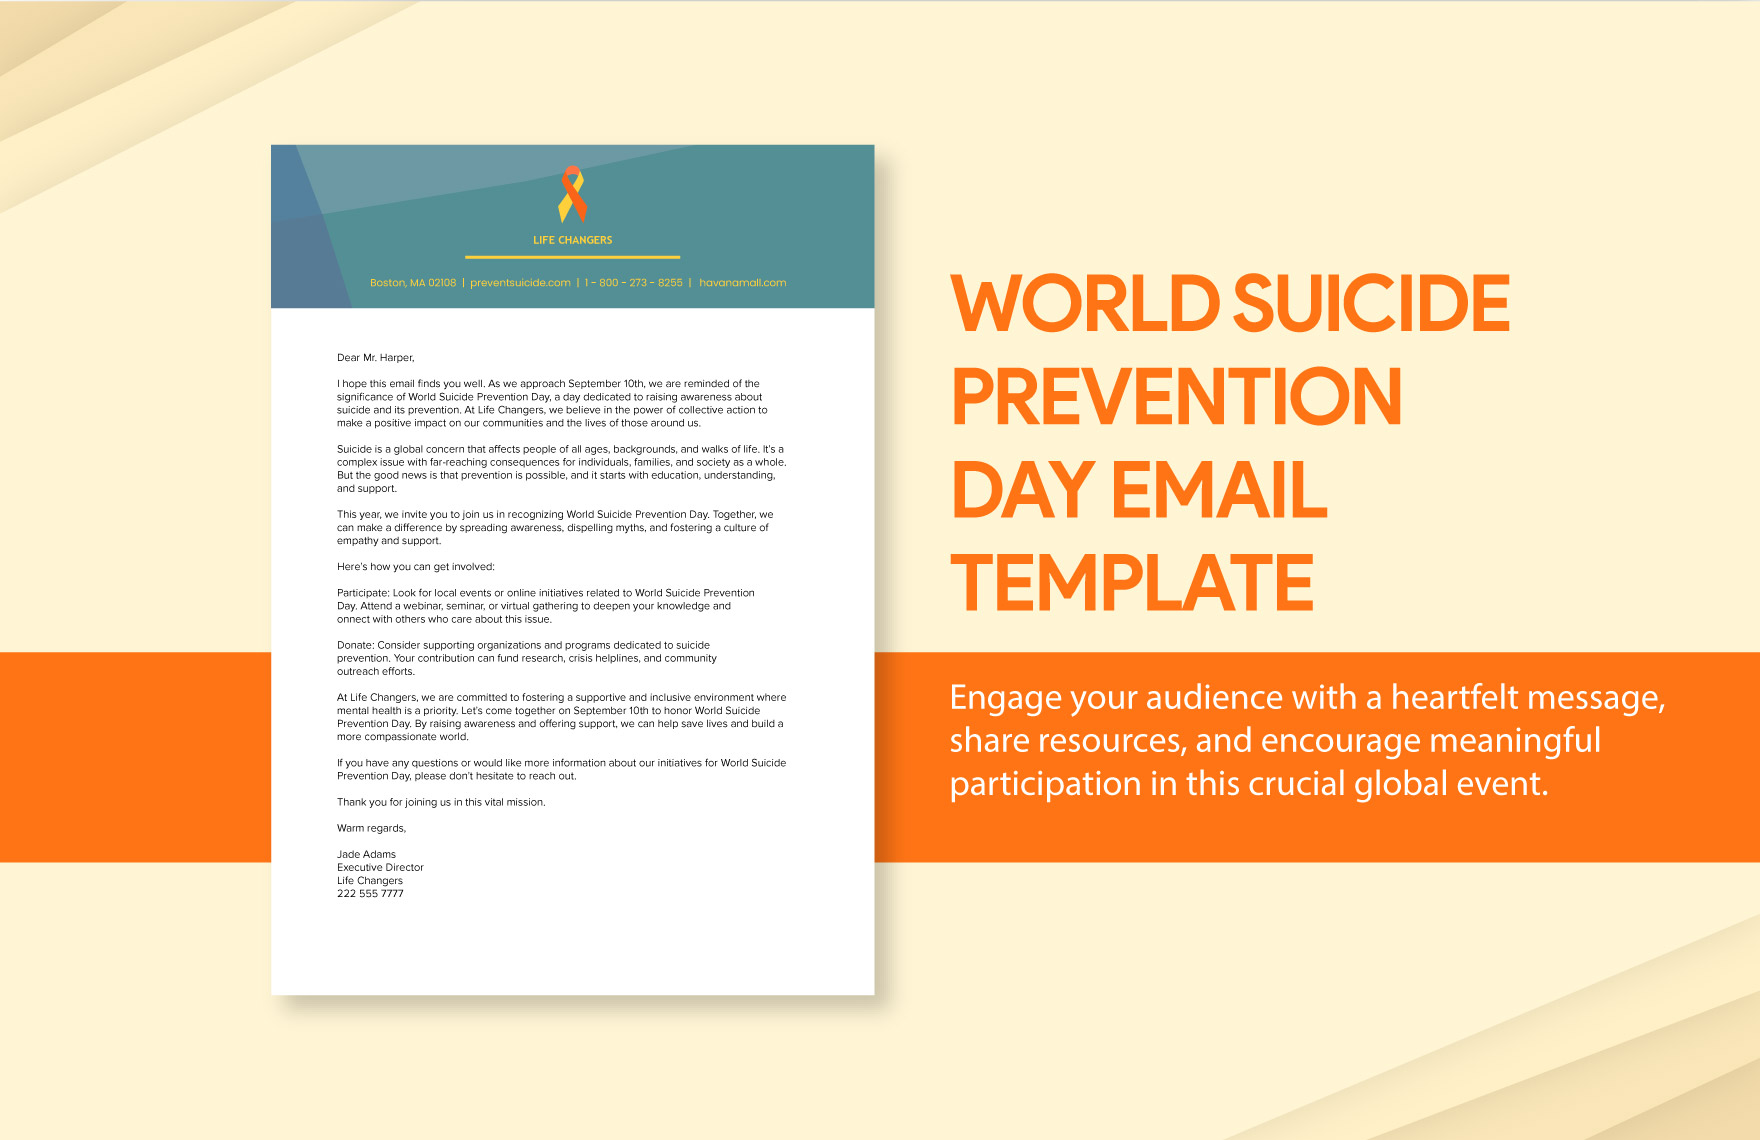 World Suicide Prevention Day Email Template